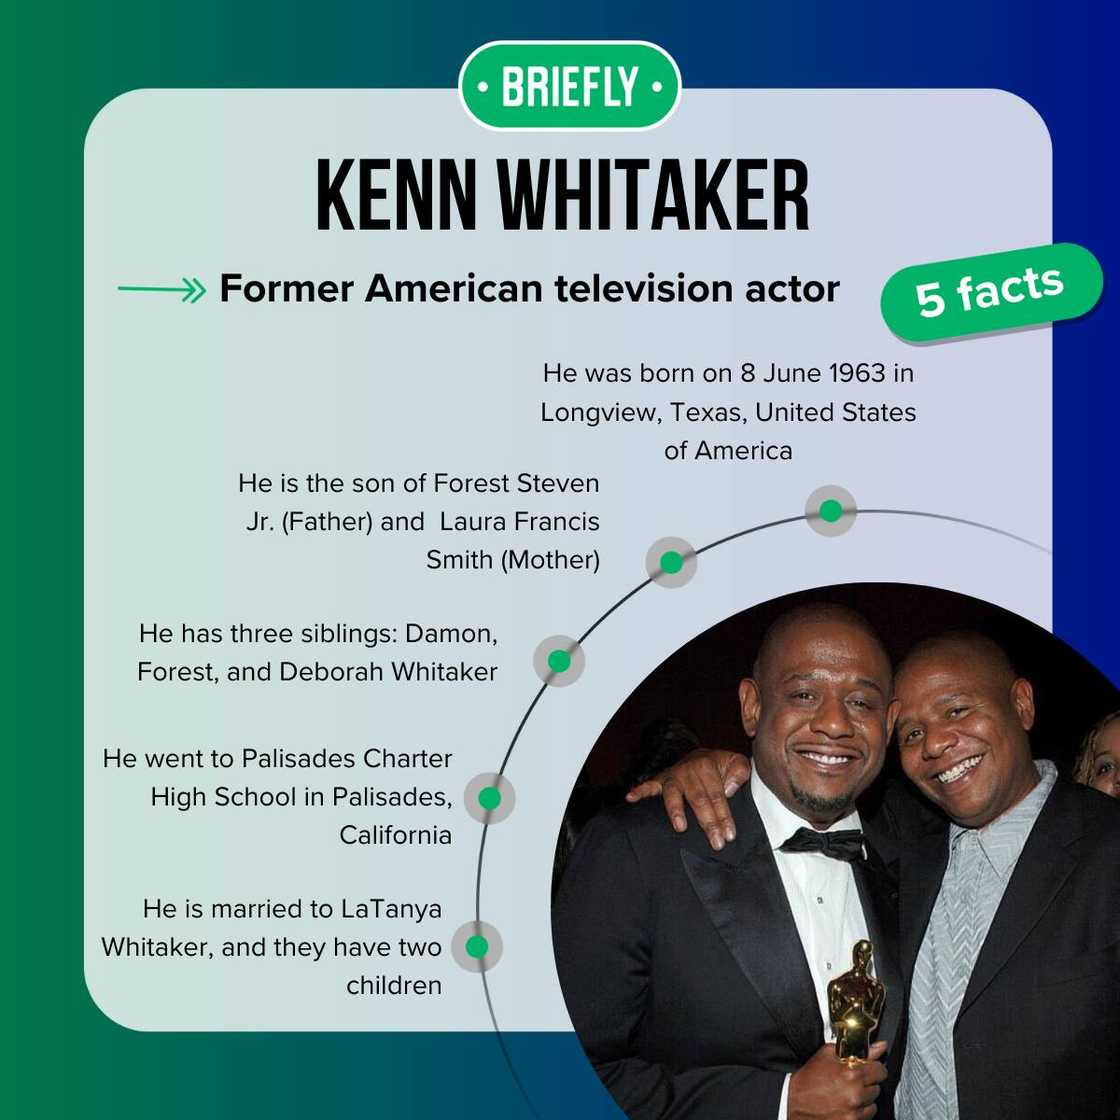 Top 5 facts about Forest Whitaker's brother Kenn Whitaker